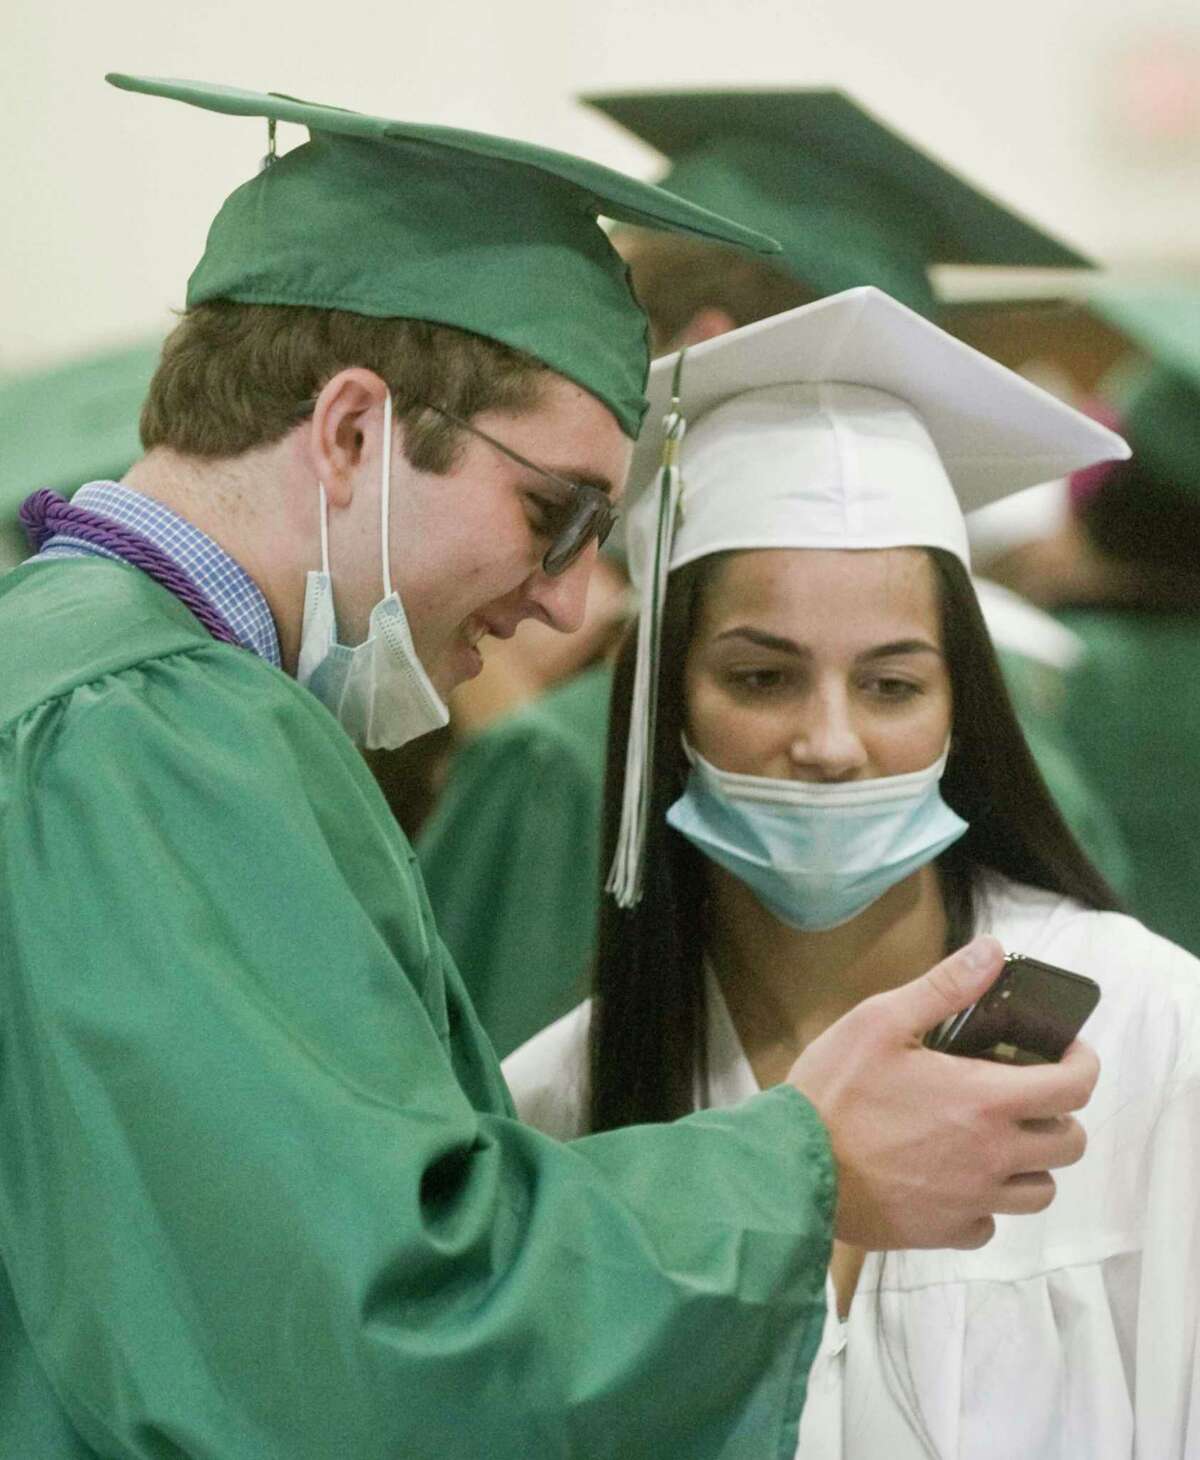 Daniel Rizvic and Thea Spinner check out a phone photo prior to the start of the New Milford High School graduation ceremony. Saturday, June 19, 2021